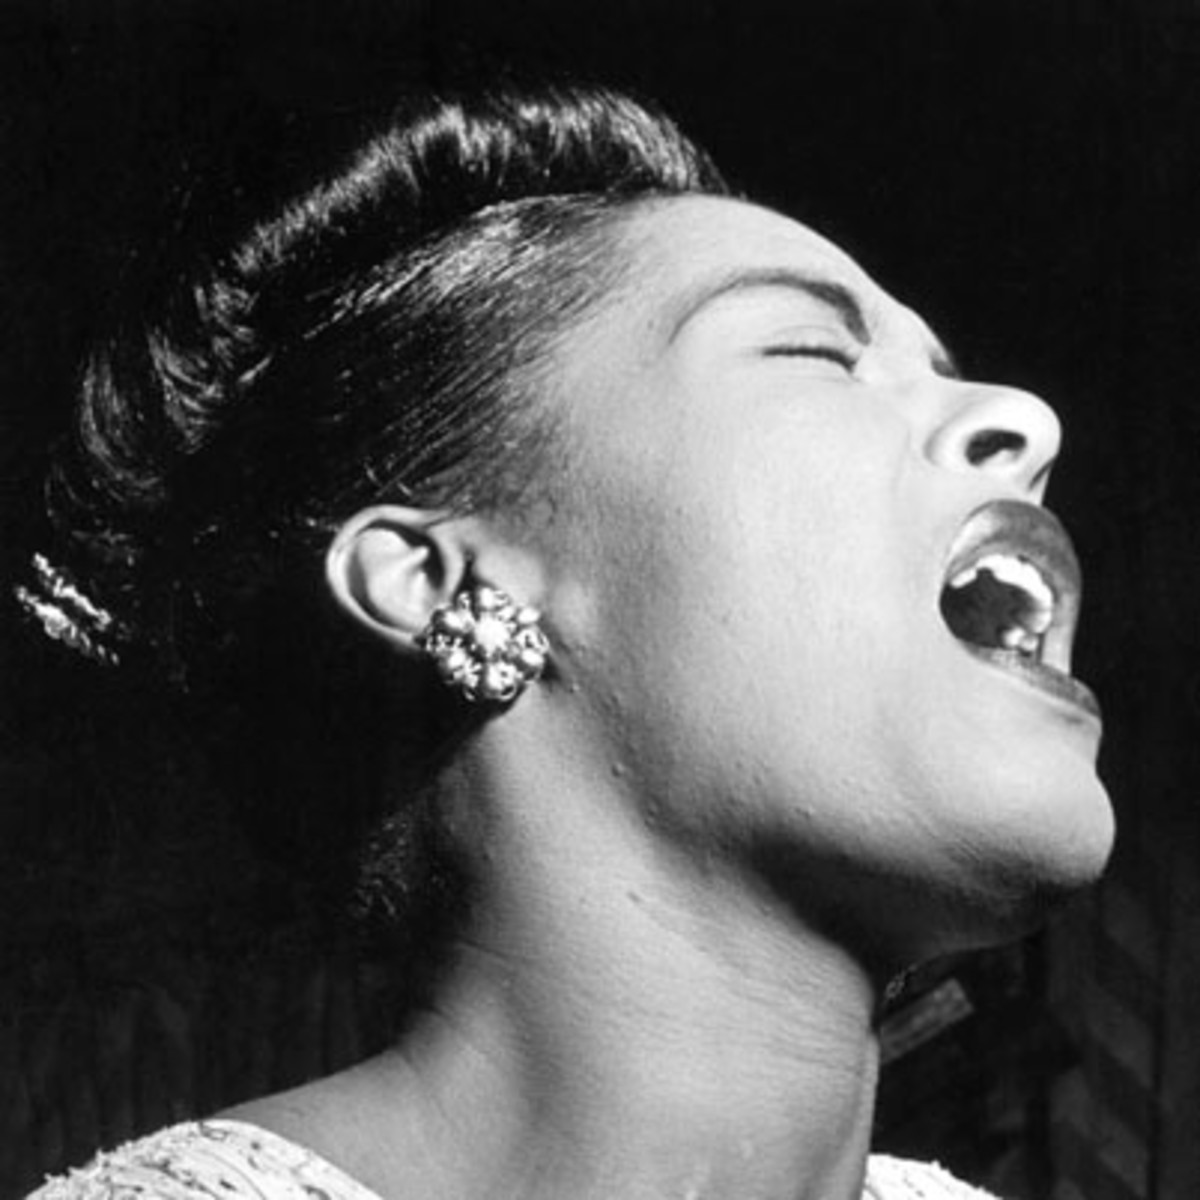 "Strange Fruit" by Billie Holiday is Northern Transmissions Song of the Day